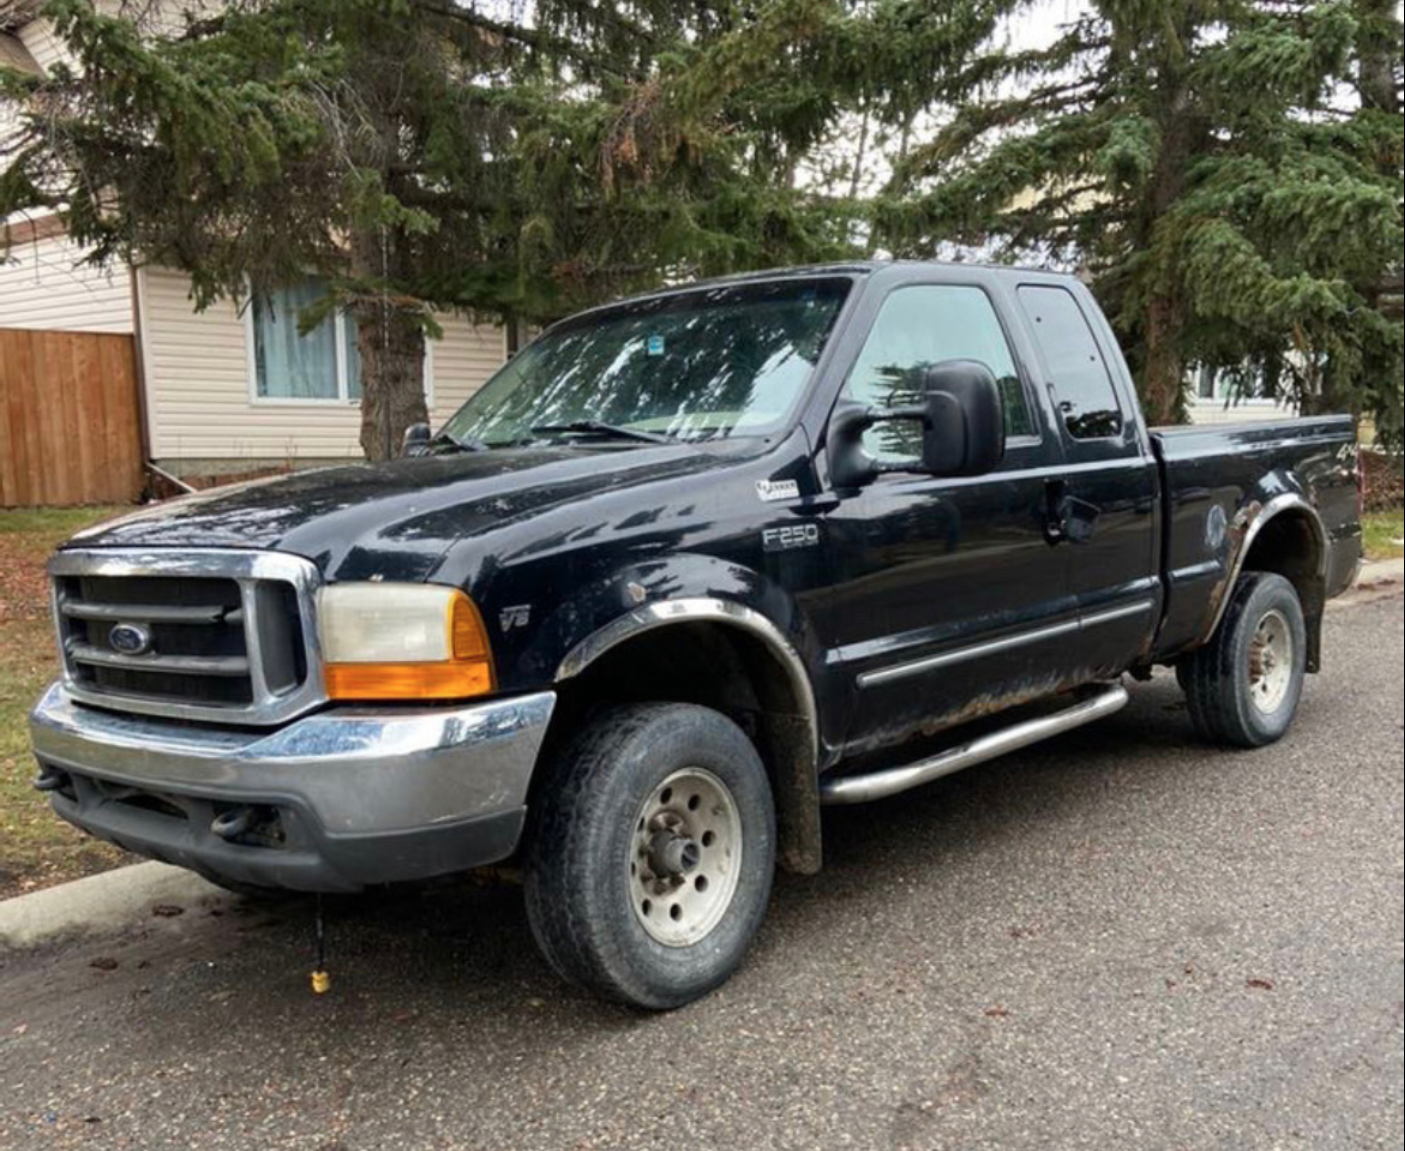 Riverbend SE Calgary Ford F150 Blown Motor | Bills Scrap Car | lat: 50.97209789252884 | long: -114.01757913729553 | Vehicle Disposal . Auto Recycling . Salvage Car Removal . Cash for Cars . Scrap Vehicle Pickup . Junk Car Towing . Unwanted Car Removal . Wrecked Car Removal . Abandoned Car Disposal . Old Car Removal . Damaged Car Removal . Non-Running Car Removal . Scrap Metal Car Pickup . Cash for Clunkers . End-of-Life Vehicle Removal . Junkyard Car Pickup . Auto Salvage . Scrap Car Buyer . Vehicle Recycling Service . Totaled Car Removal